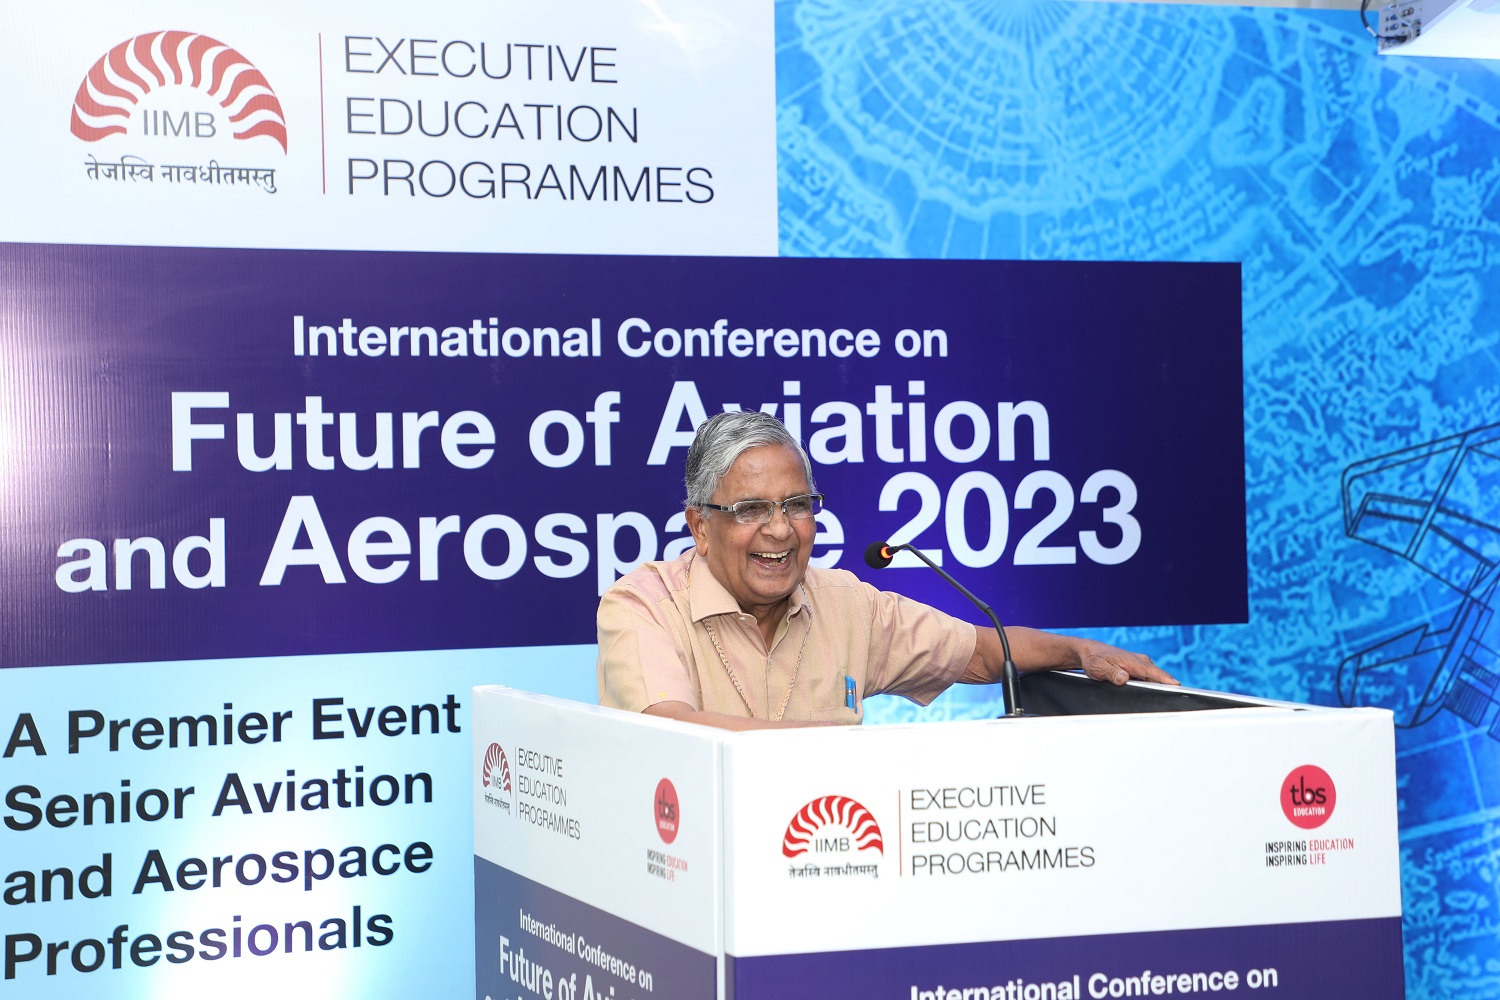 Dr. Kota Harinarayana, Former Programme Director and Chief Designer Tejas, Light Combat Aircraft, speaks on 'Open Skies and Drone Policy'.